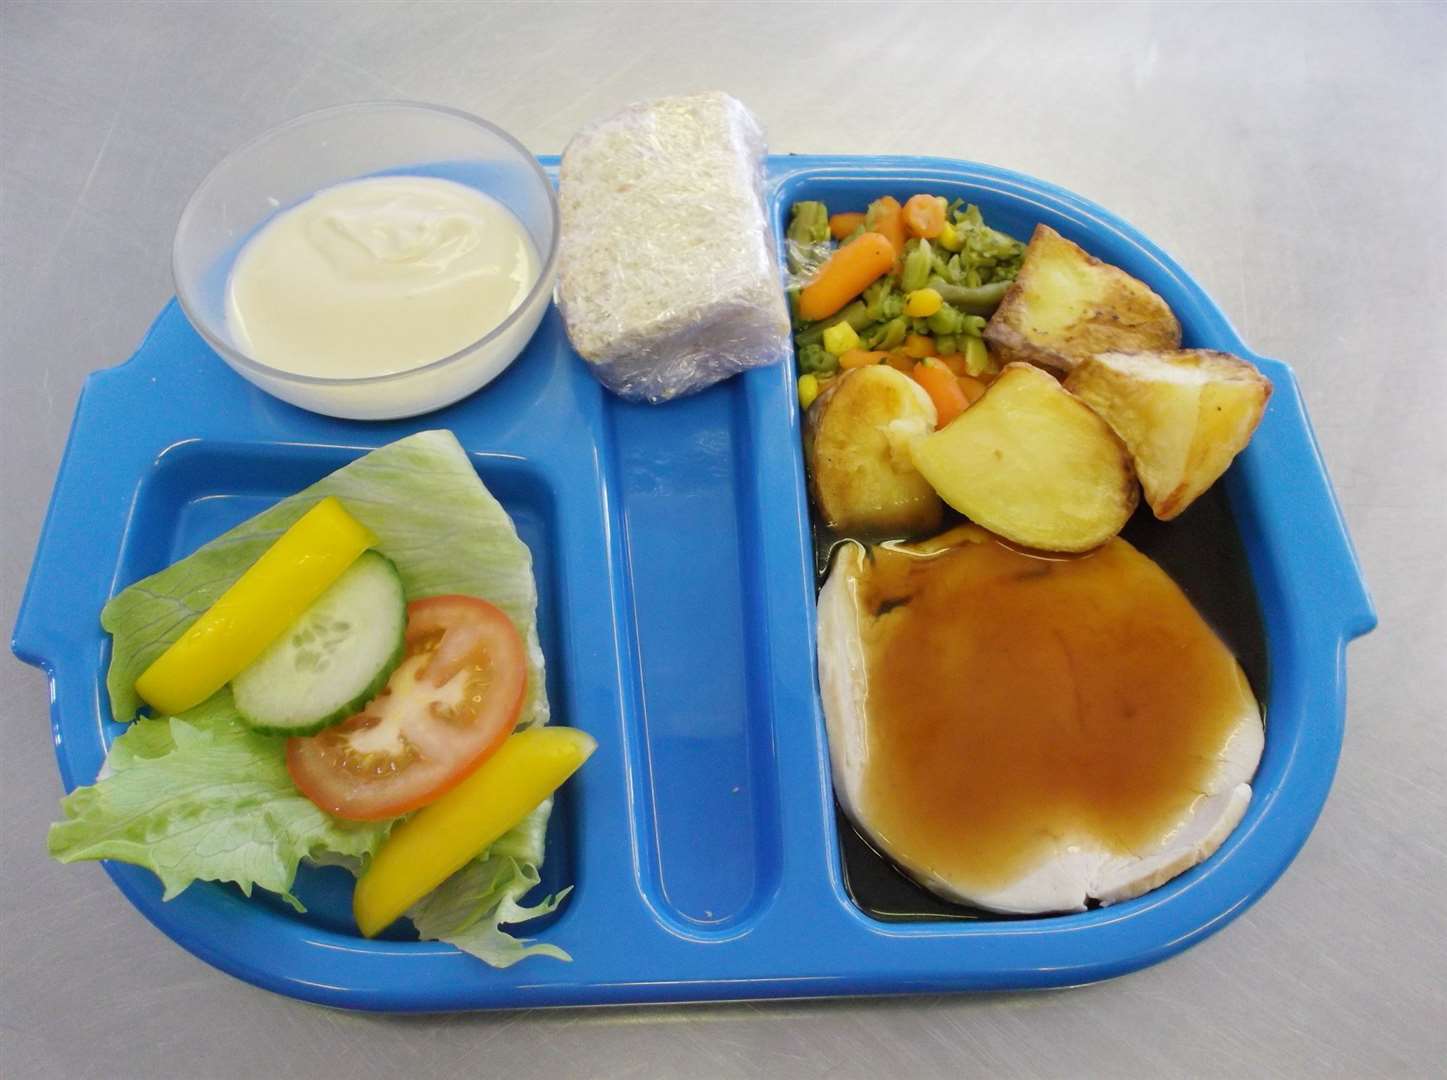 Free school dinners will be made available to all primary school age groups.